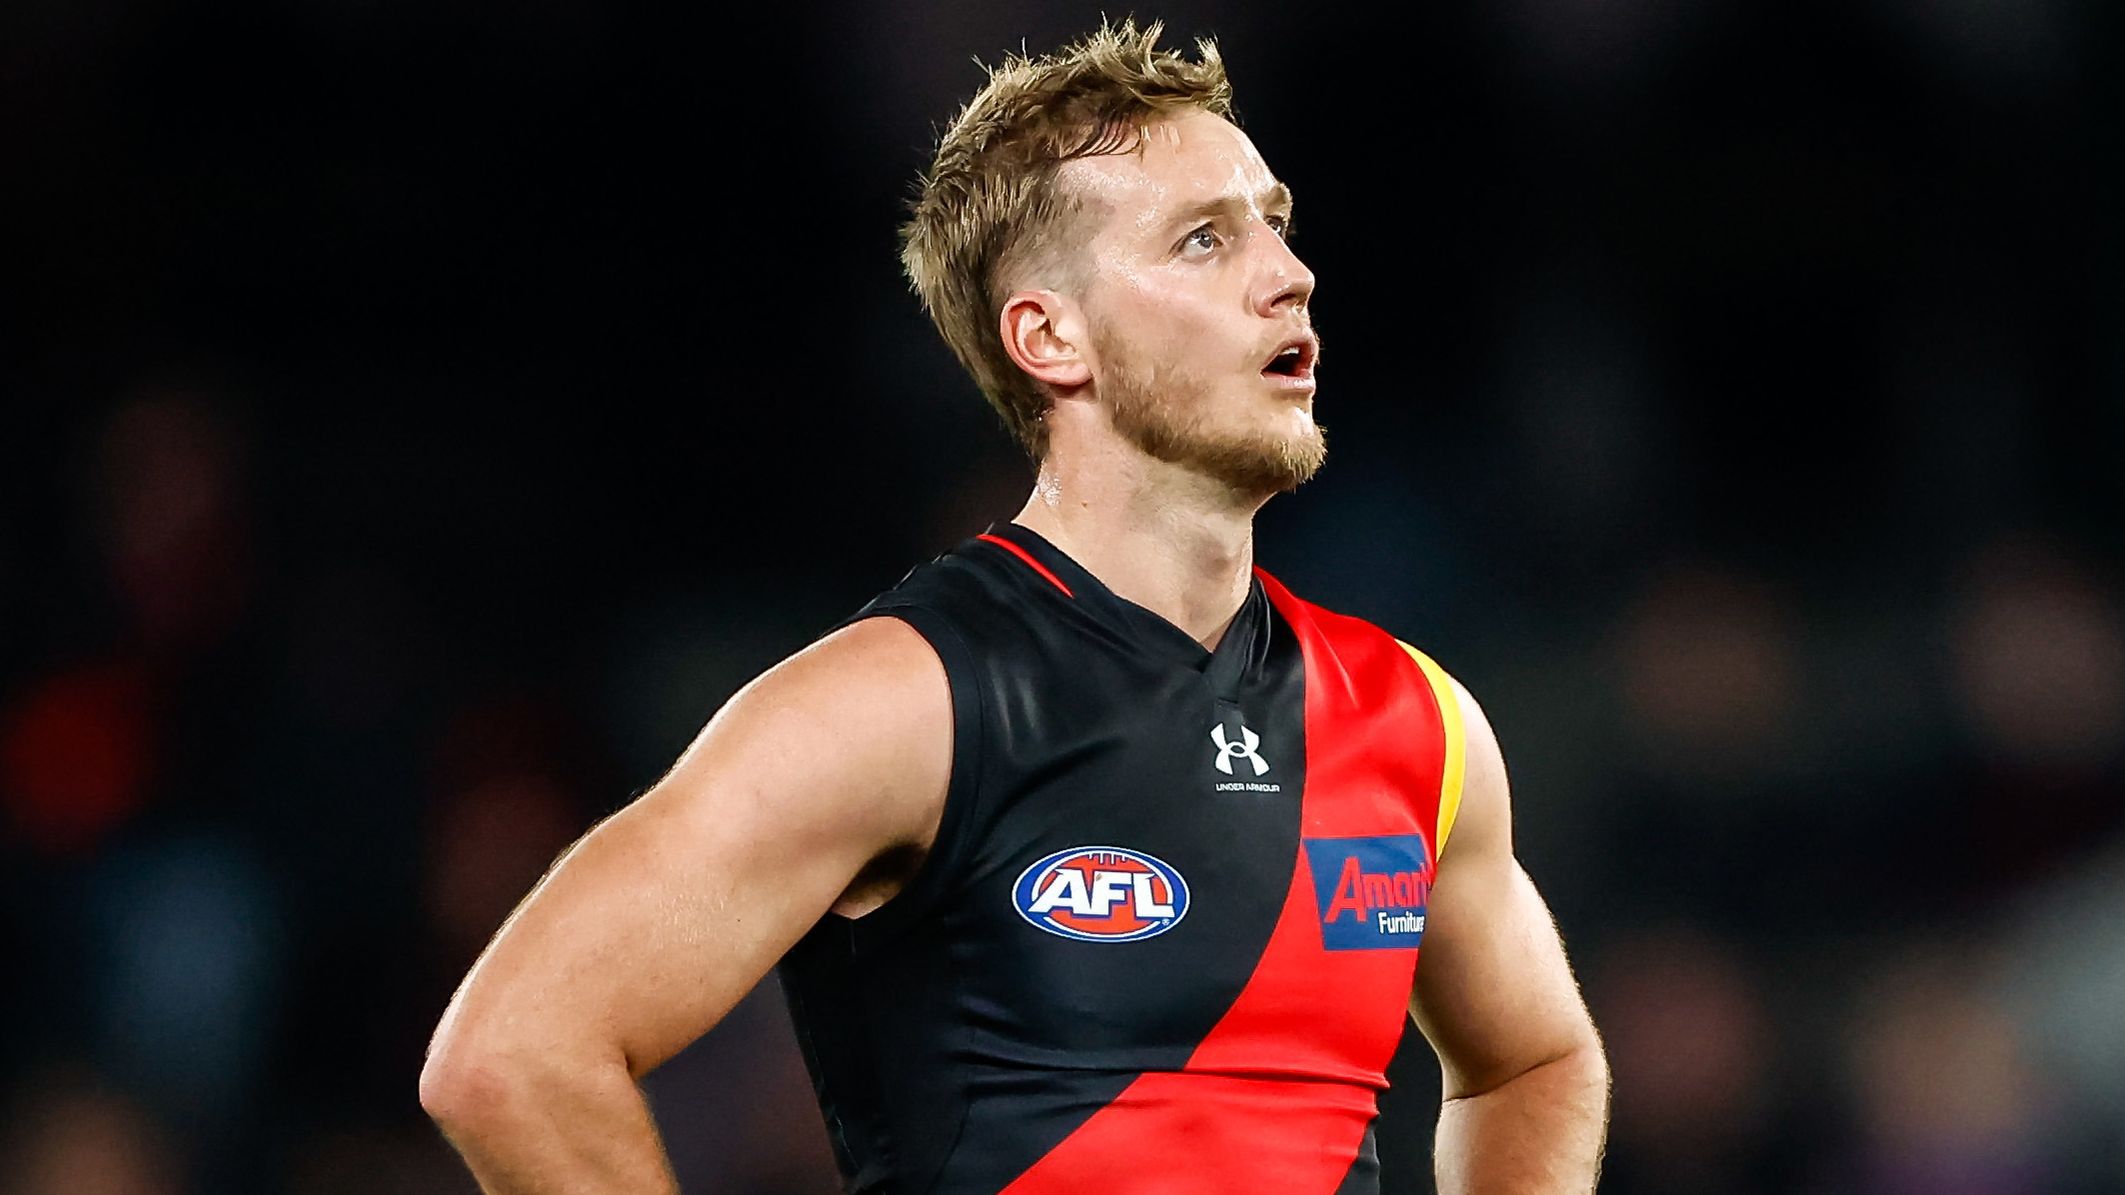 MELBOURNE, AUSTRALIA - JULY 21: Darcy Parish of the Bombers looks dejected after a loss during the 2023 AFL Round 19 match between the Essendon Bombers and the Western Bulldogs at Marvel Stadium on July 21, 2023 in Melbourne, Australia. (Photo by Dylan Burns/AFL Photos via Getty Images)